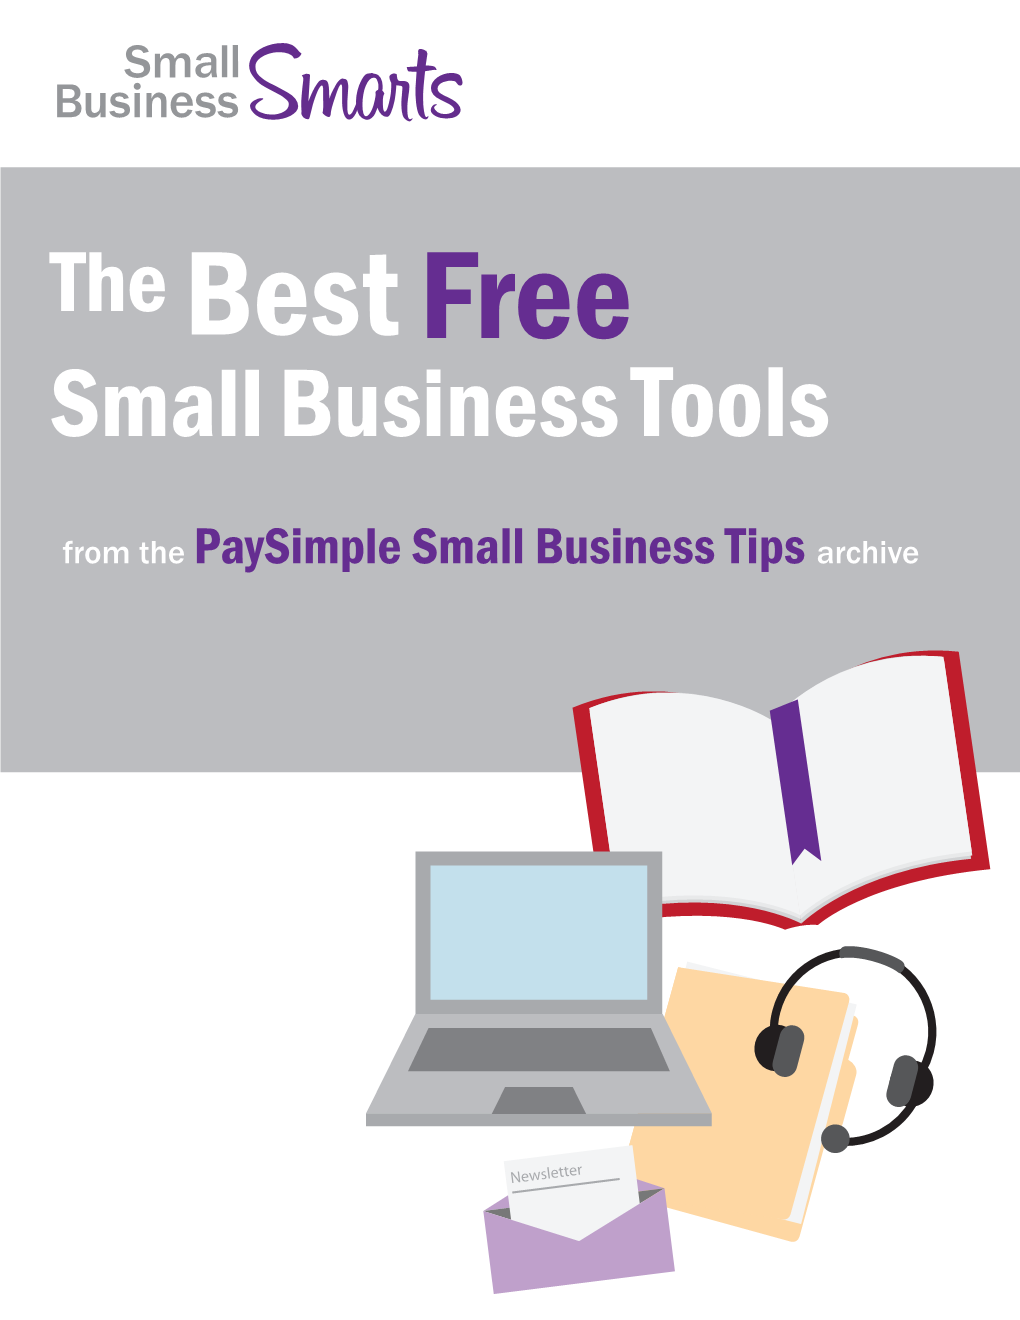 From the Paysimple Small Business Tips Archive